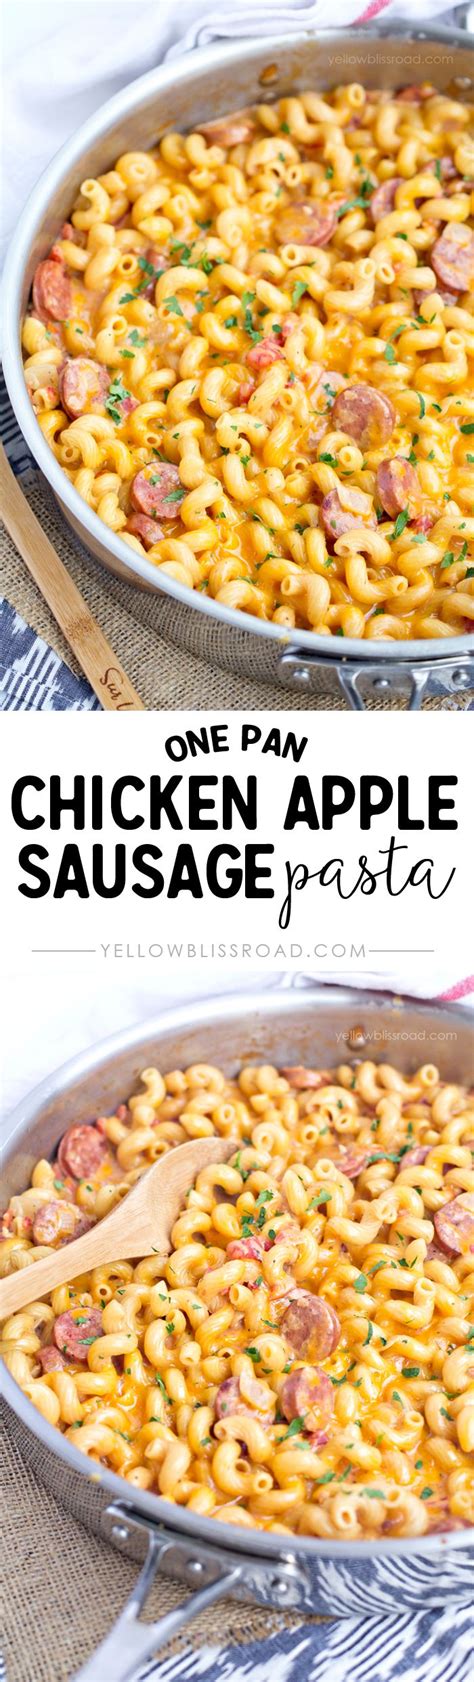 Chicken and apple sausage with onion confit, baked smoked chicken apple sausage with cider sauce, chicken… 200 chicken recipes combines 200 classic and contemporary dishes for every occasion. One Pan Chicken Apple Sausage Pasta | Recipe | Food, Chicken sausage recipes, Food recipes